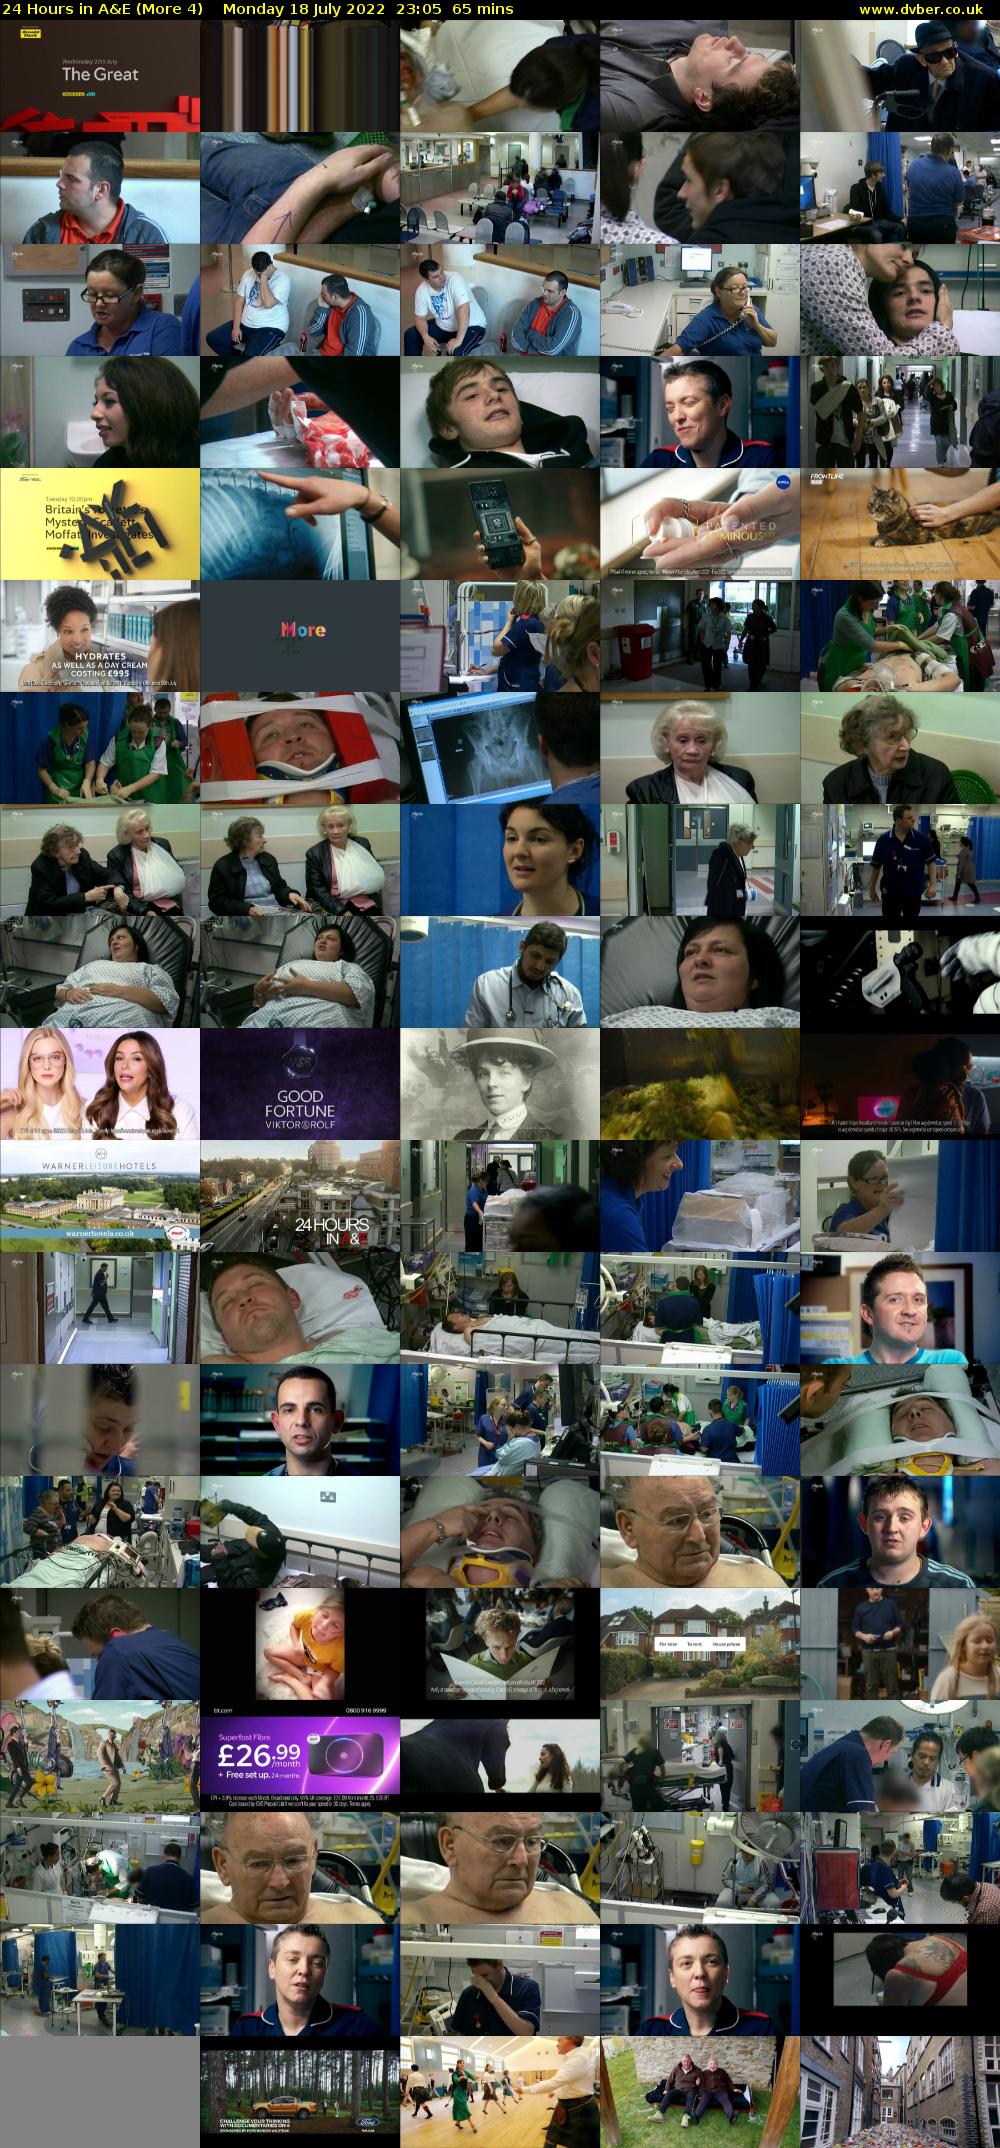 24 Hours in A&E (More 4) Monday 18 July 2022 23:05 - 00:10